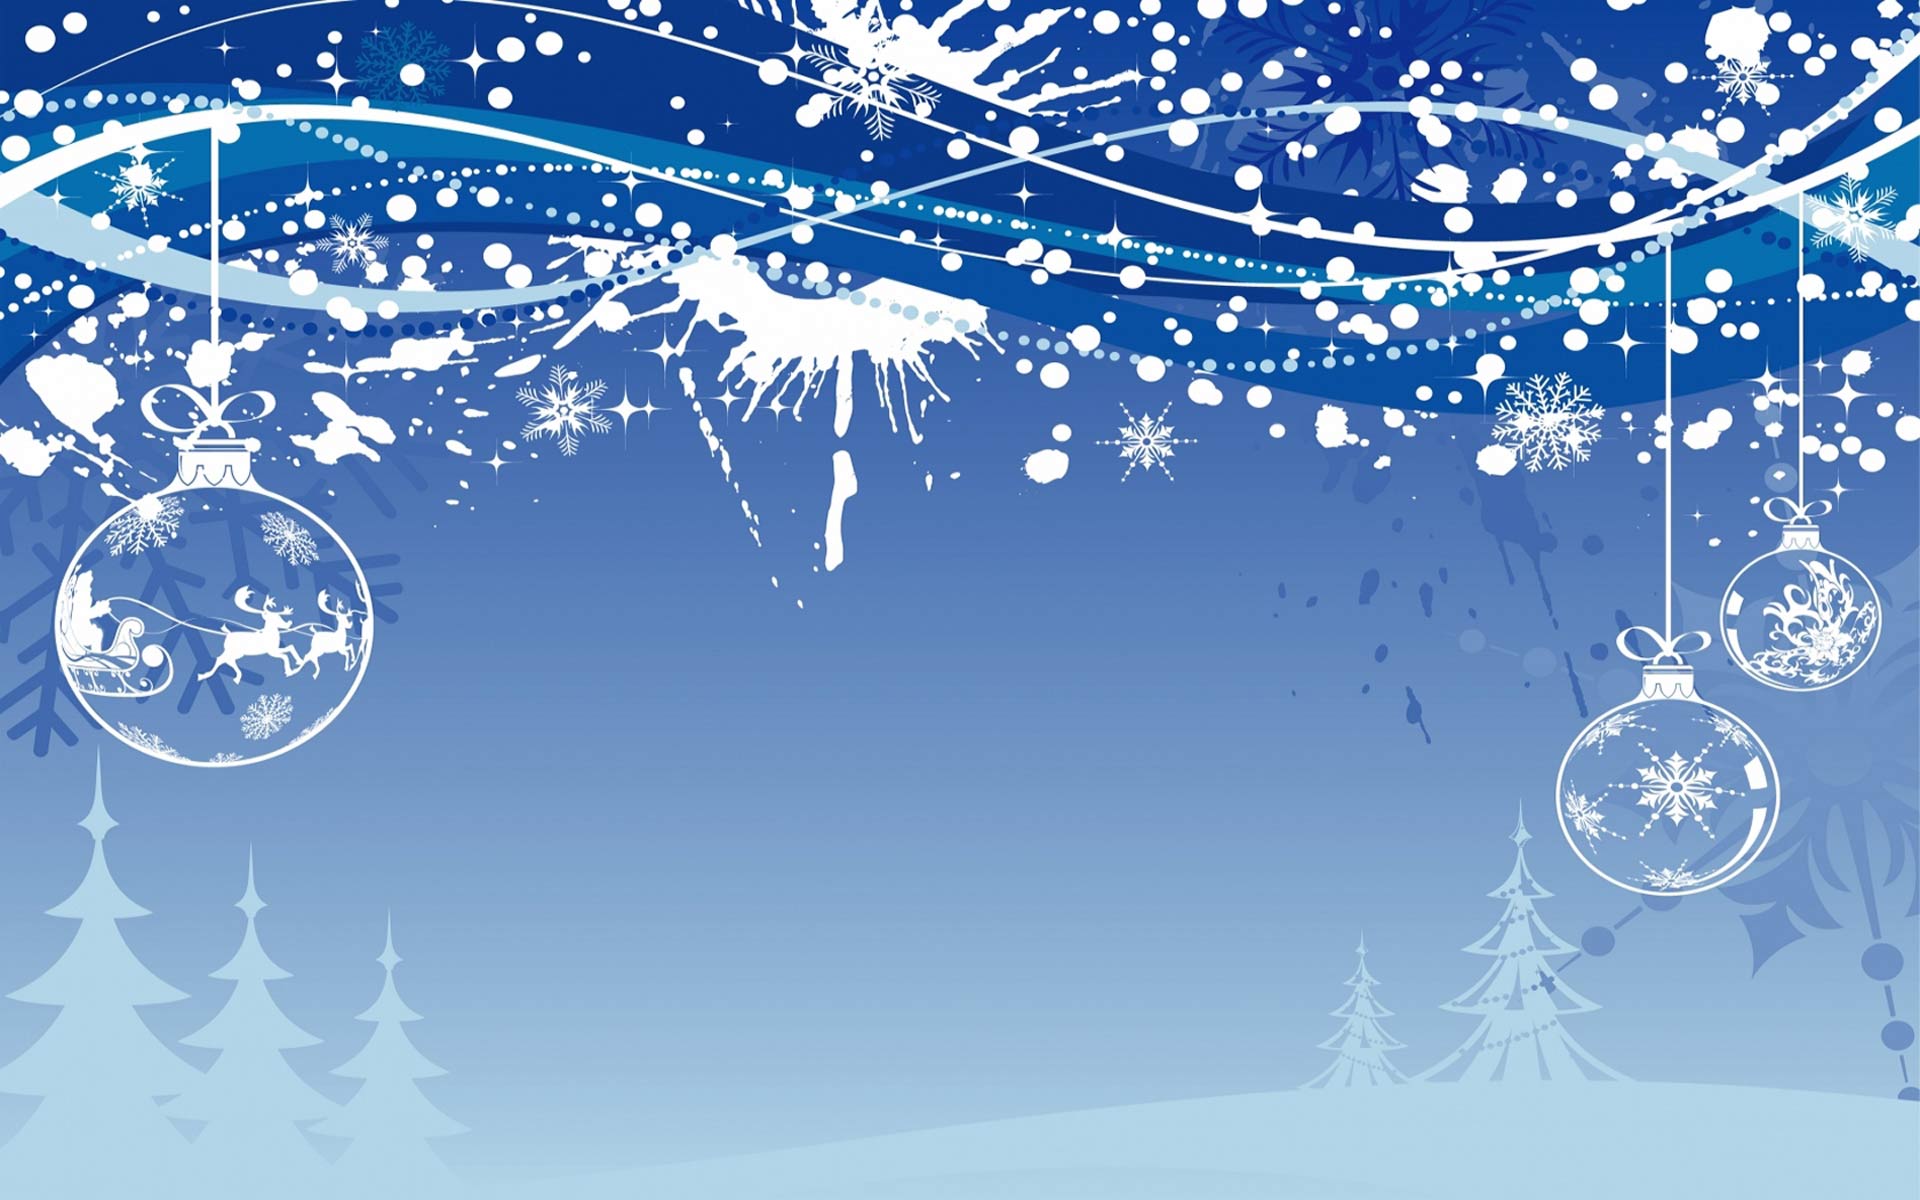 Collection of Christmas Backgrounds Free on HDWallpapers